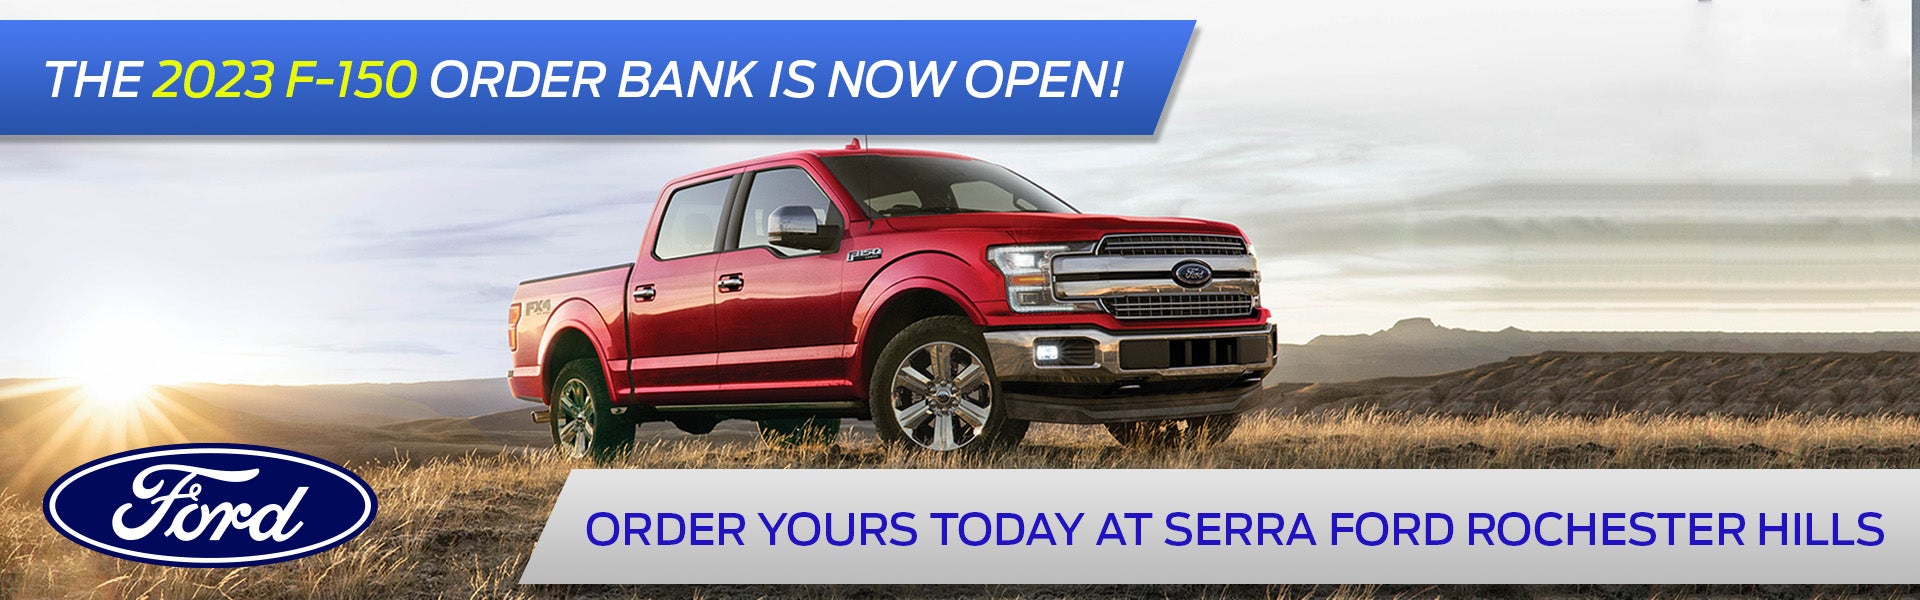 Browse New & Used Ford Vehicles | Serra Ford Rochester Hills